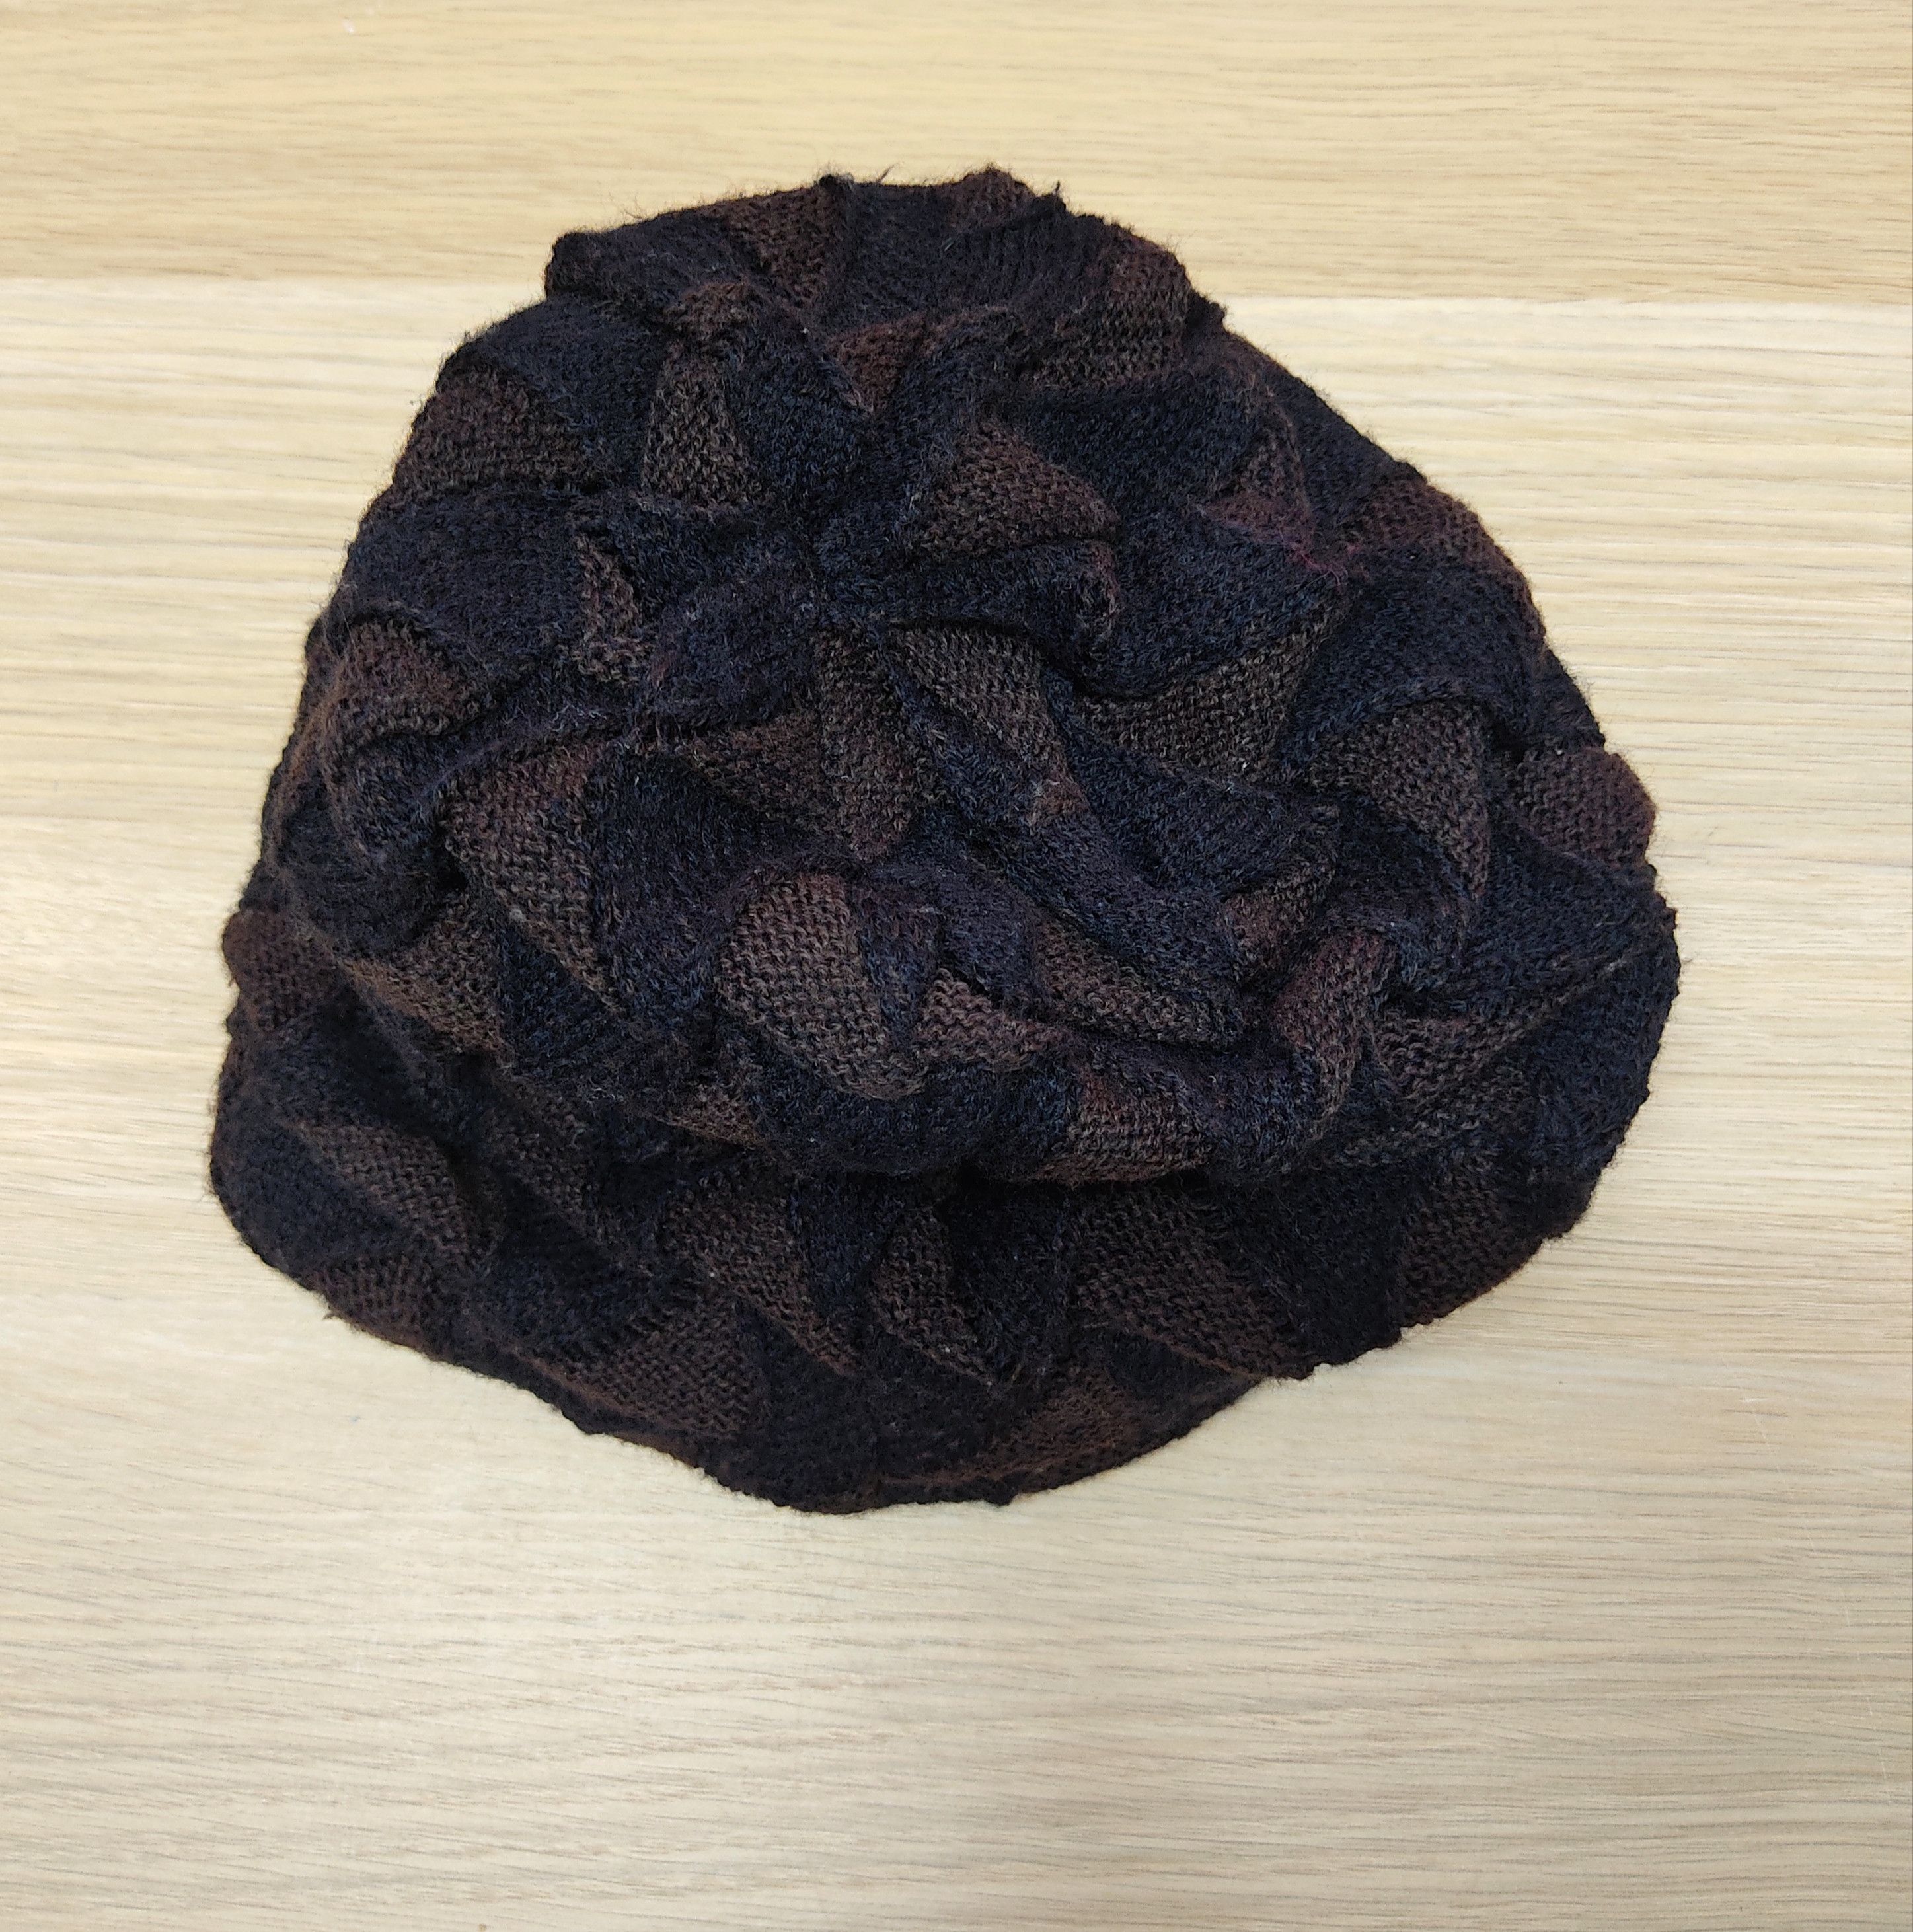 Rare - Reversible Knitted Chrome Hearts Inspired Pattern Beanie - 6